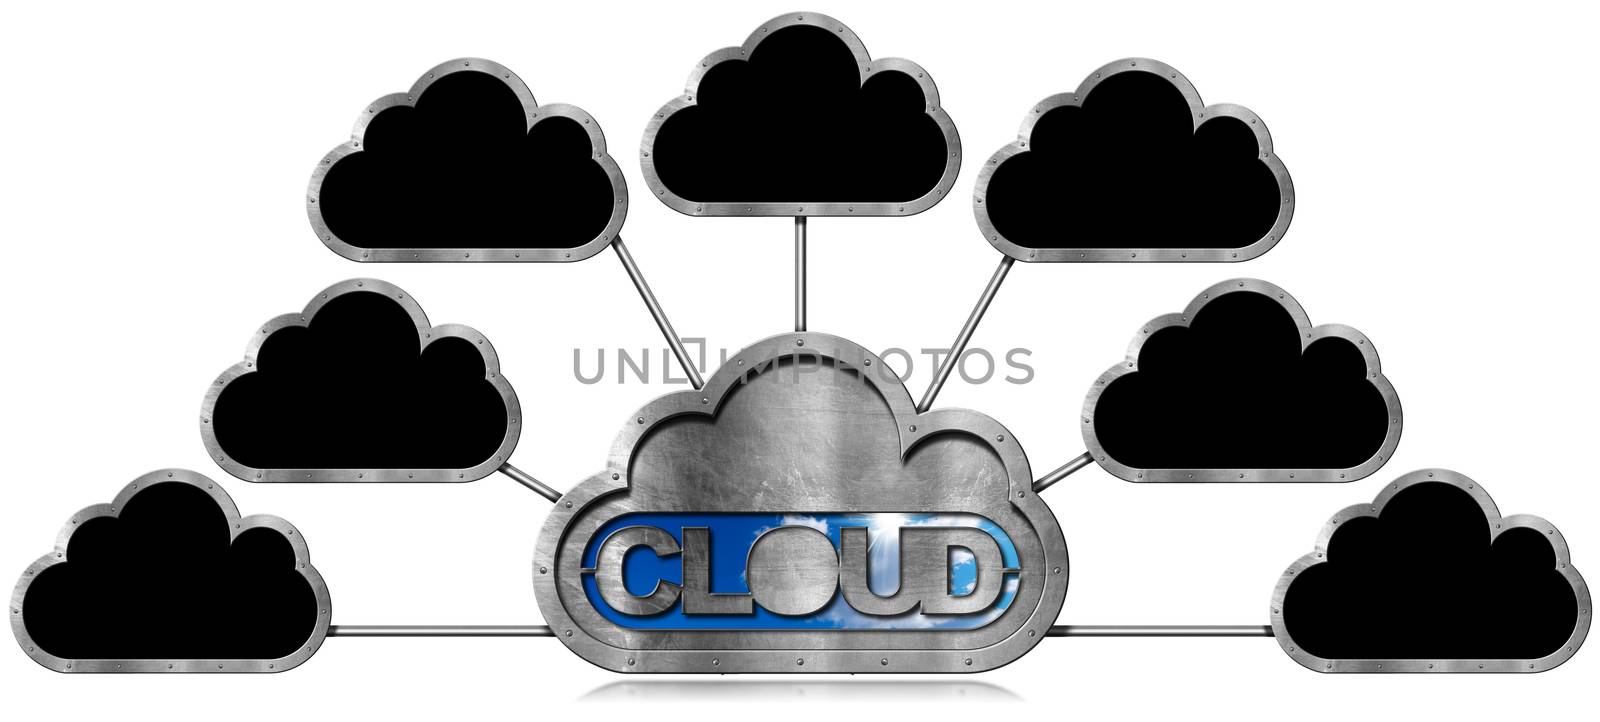 Symbol in the shape of a cloud with a sky and clouds and text Cloud connected to seven empty clouds. Concept of cloud computing